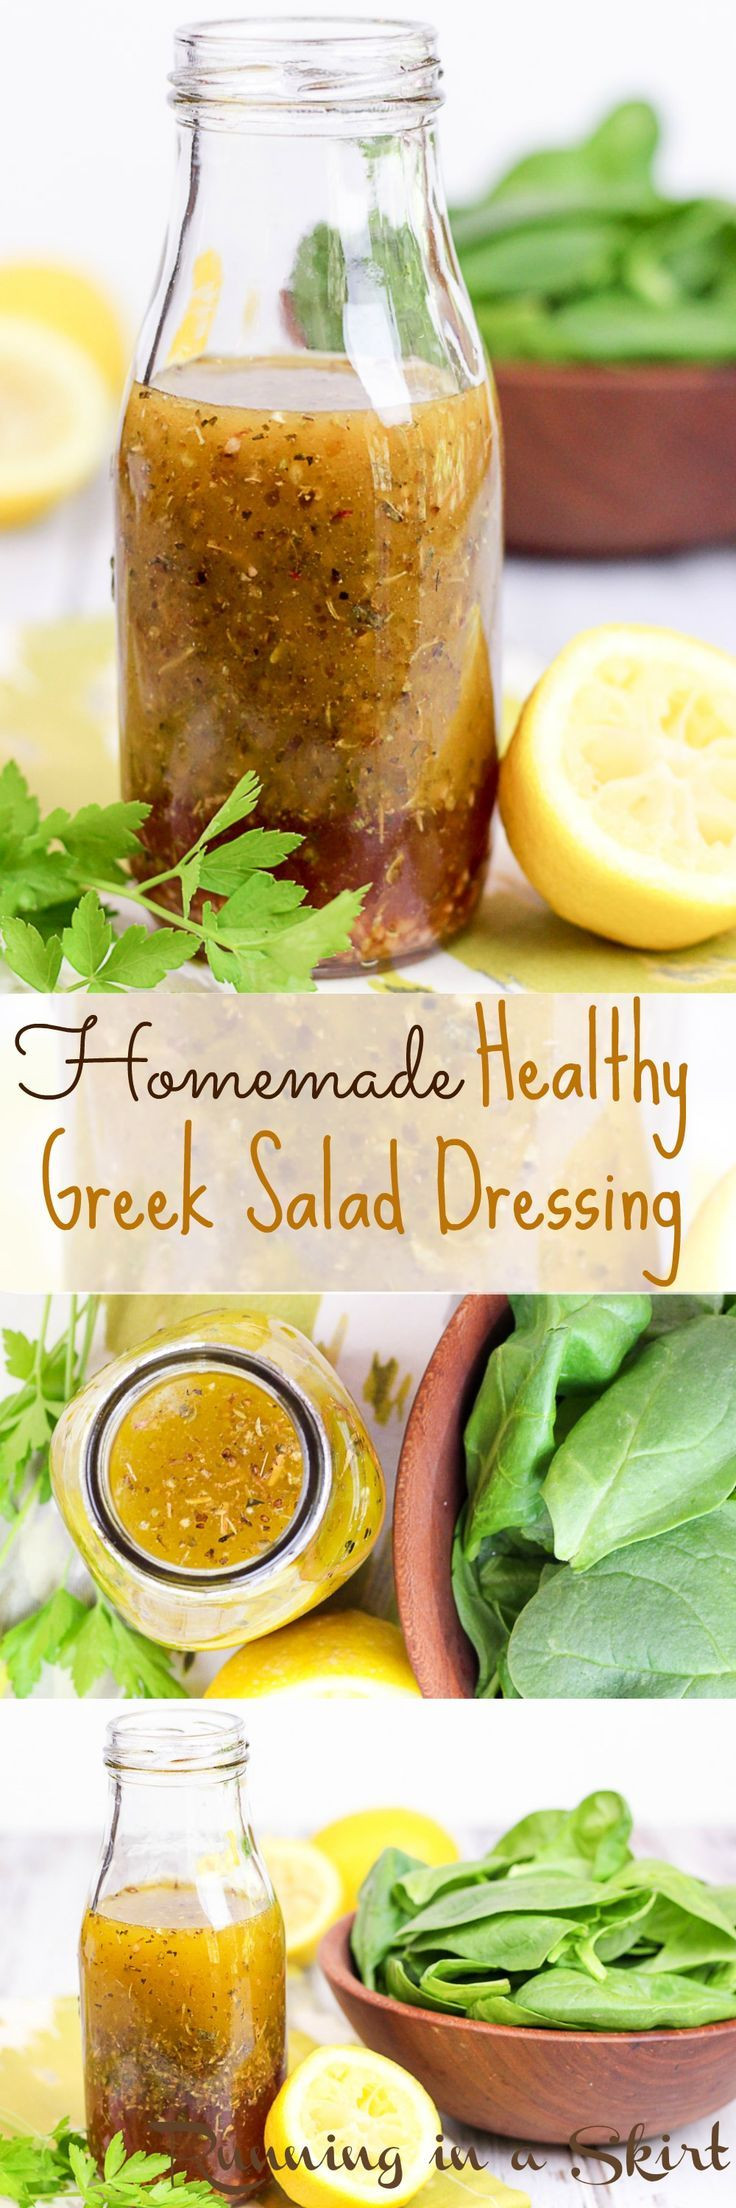 Salads Dressing Recipes Healthy
 Best 25 Clean eating salads ideas on Pinterest